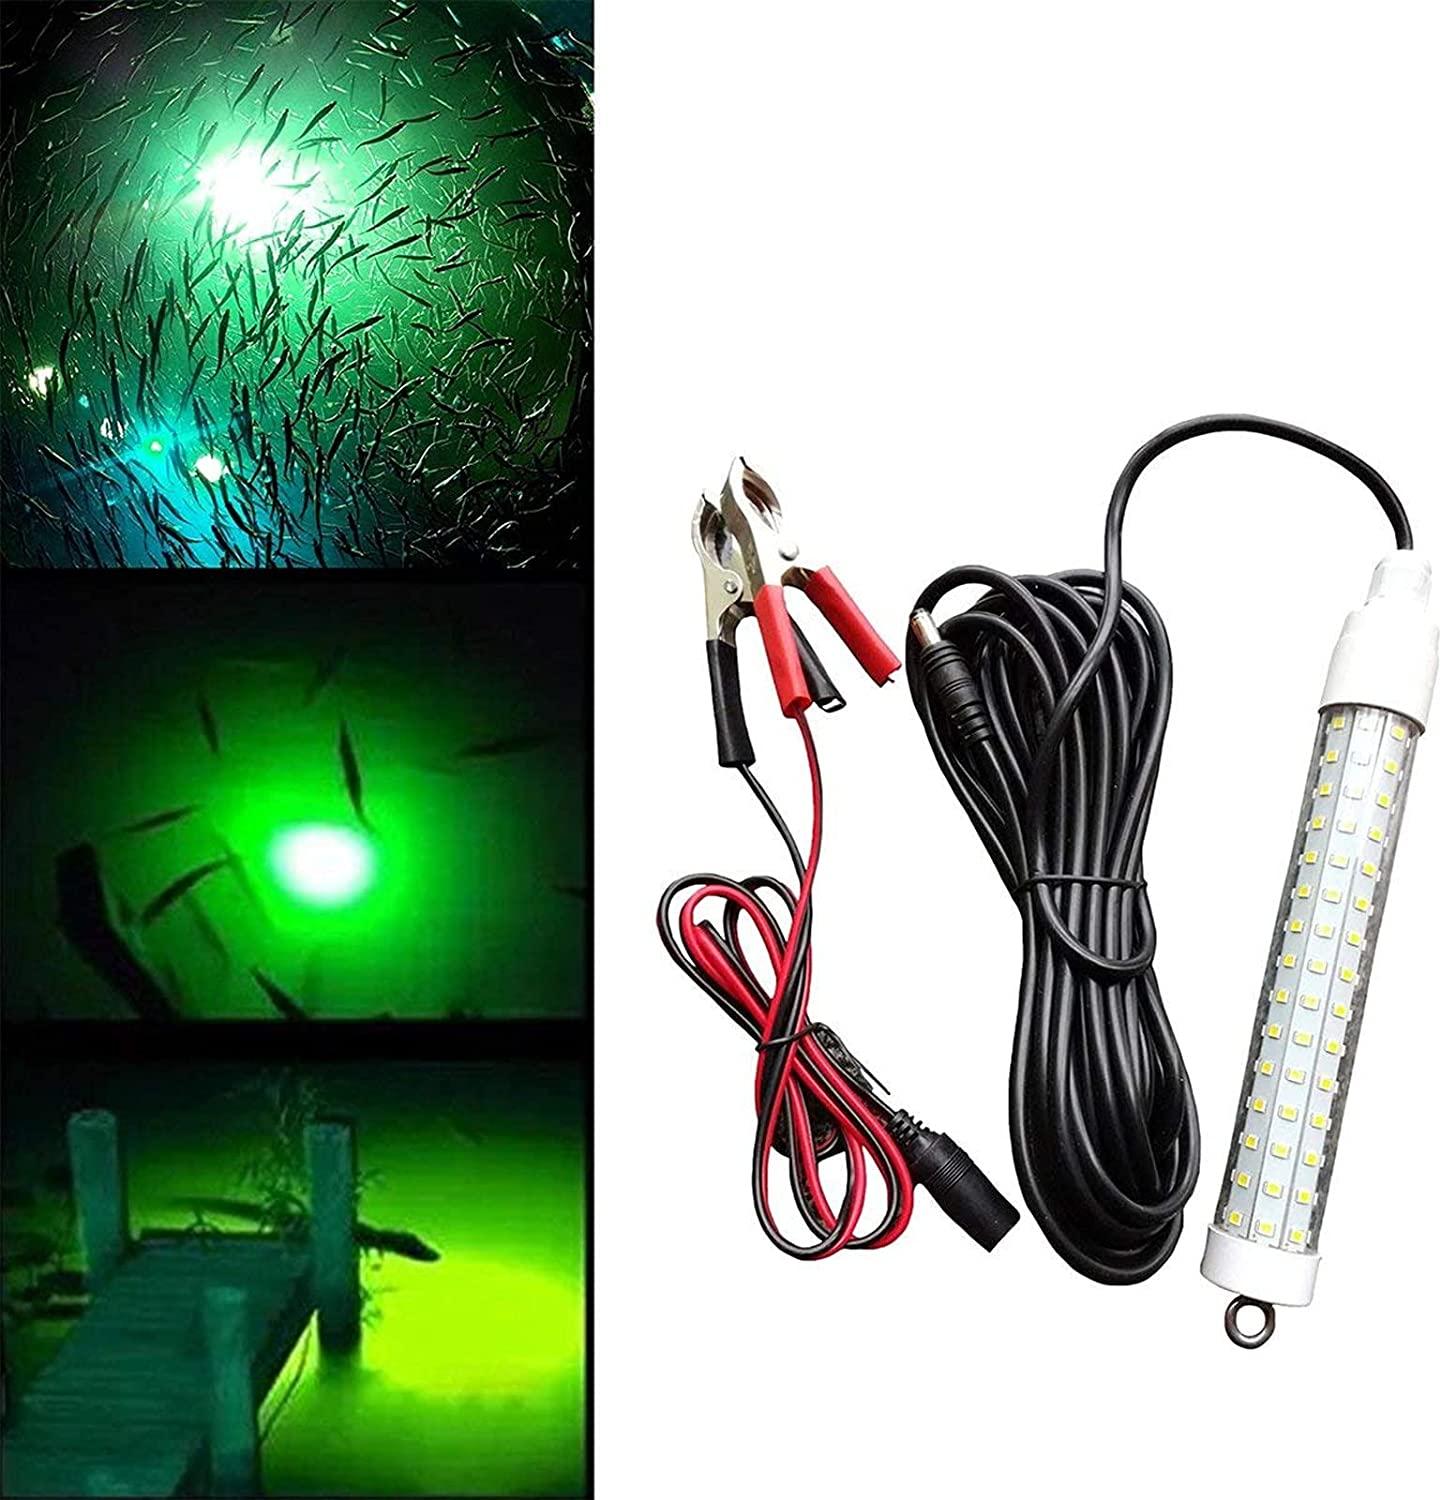 12V 108 LED Fishing Light Underwater Submersible Crappie Shad